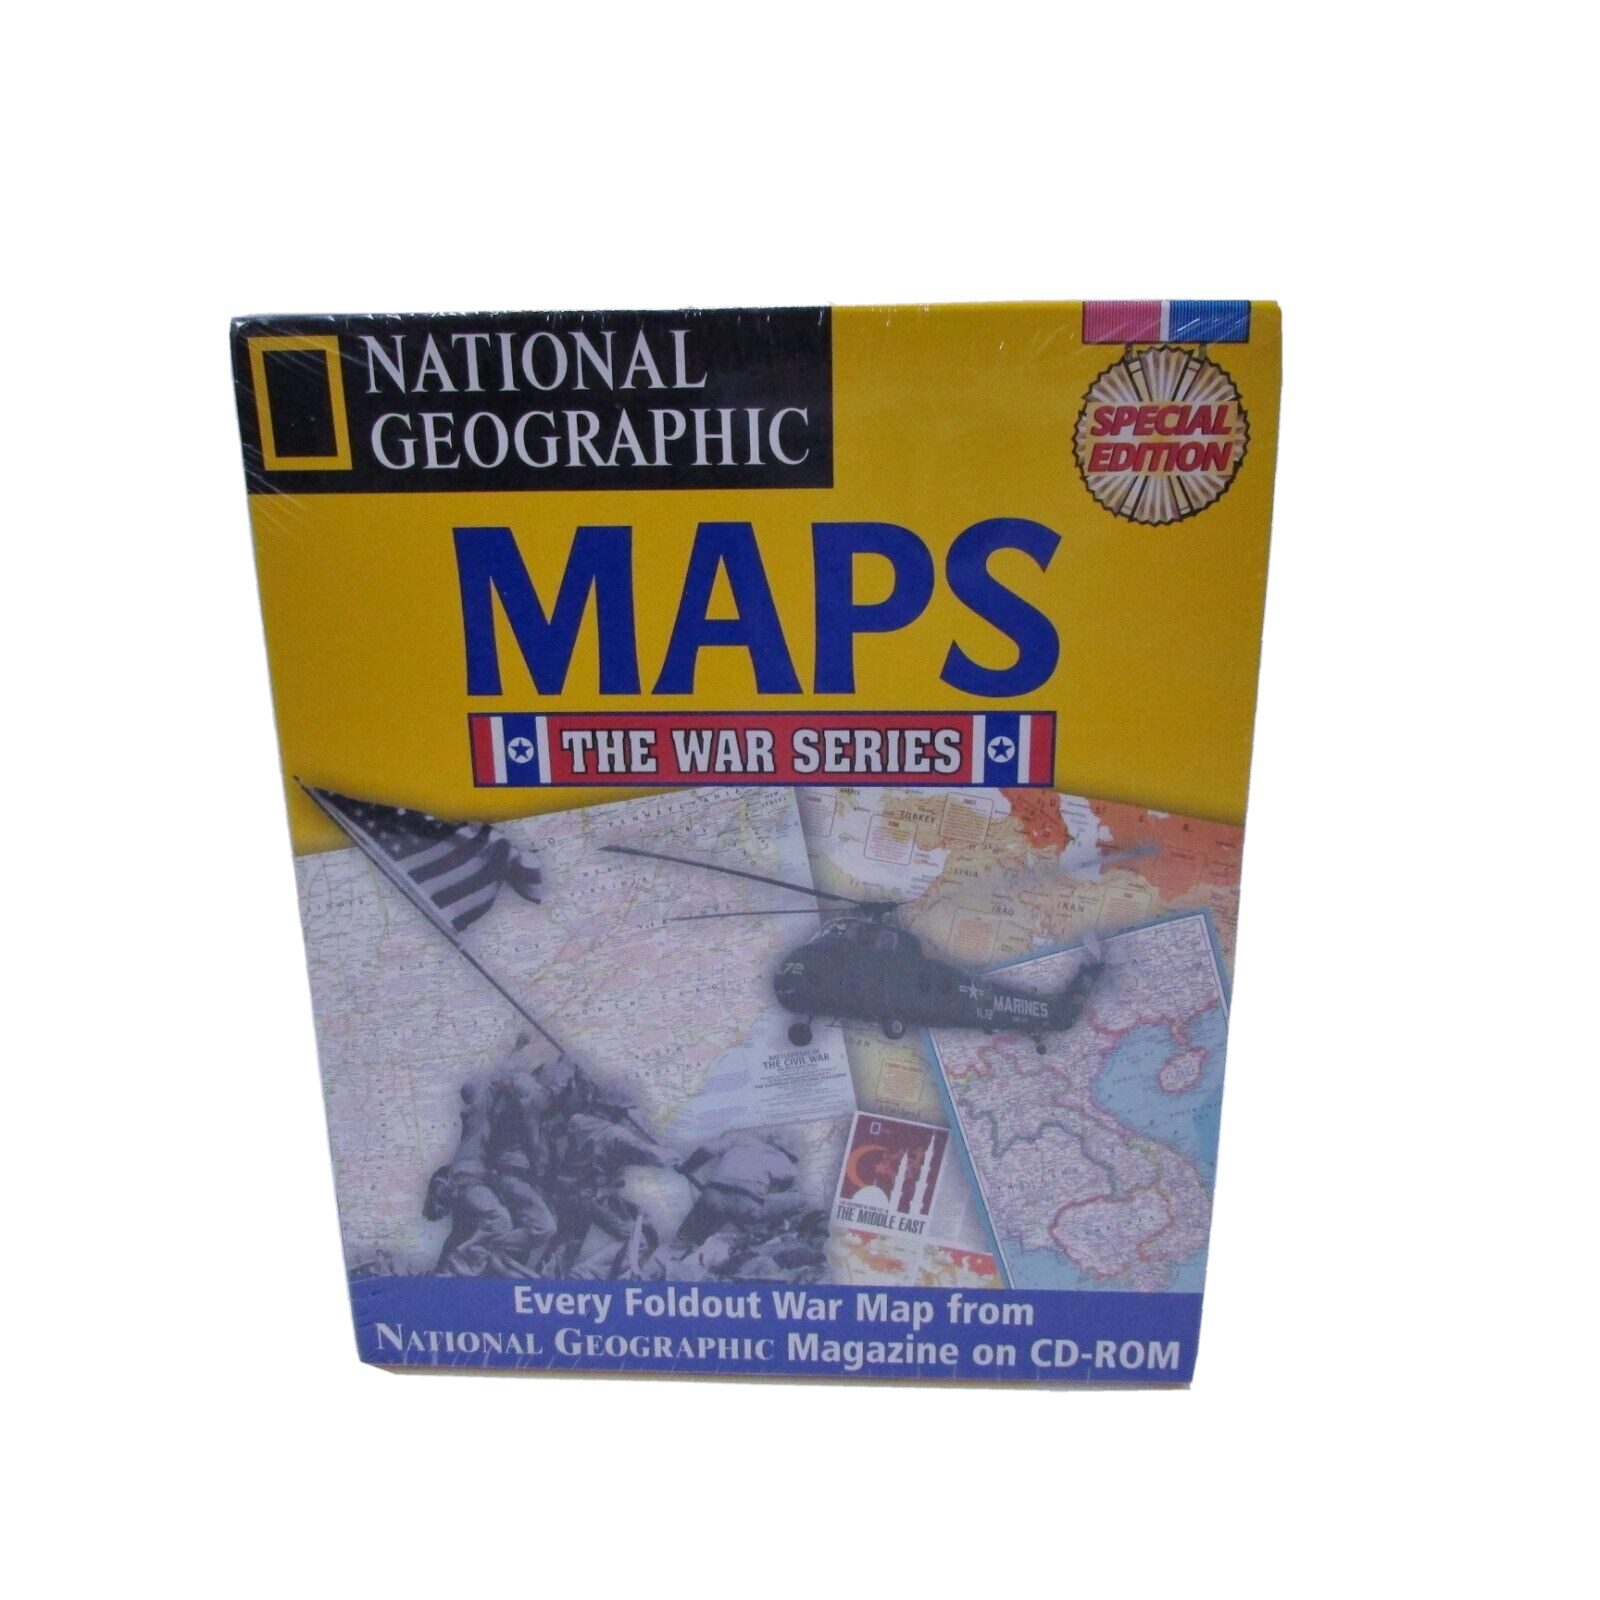 National Geographic Maps The War Series Special Edition PC CD-ROM New Sealed